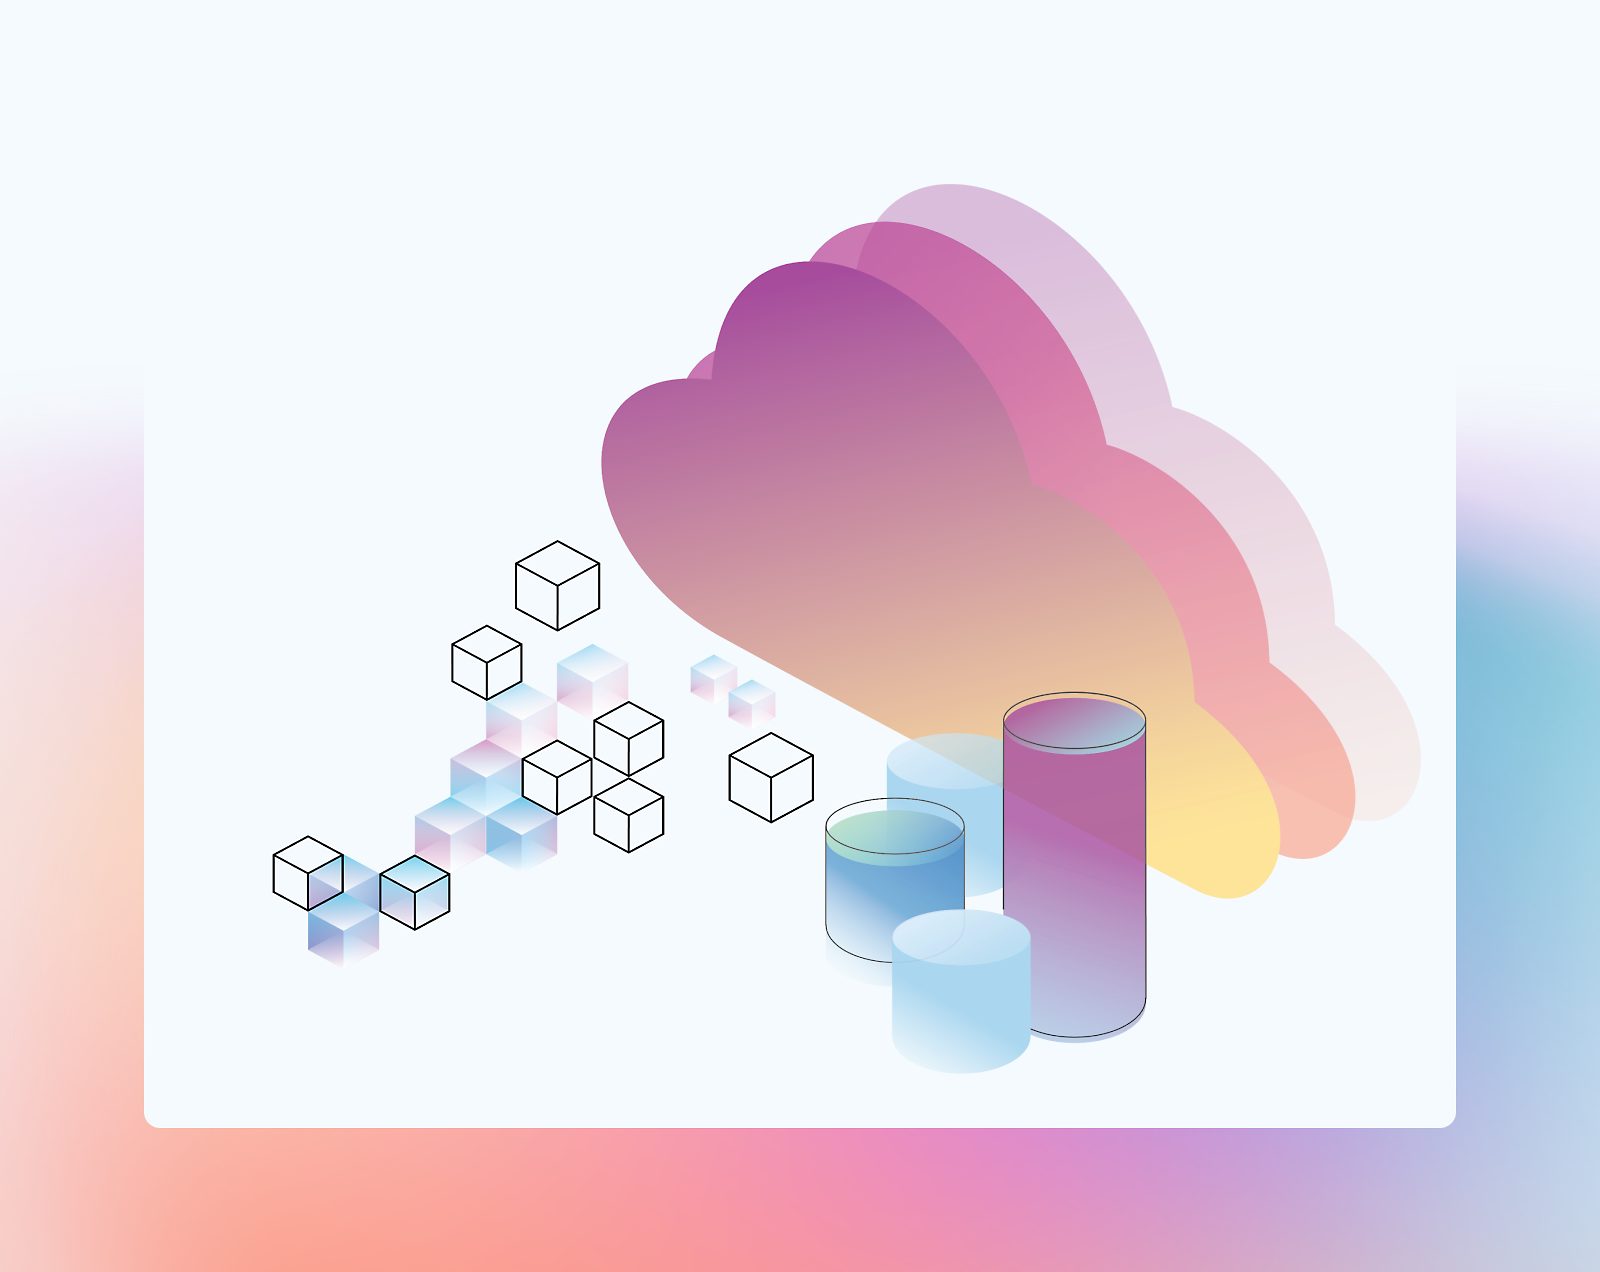 Illustration of a stylized cloud with a gradient of purple and pink colors, accompanied by floating cubes and cylindrical graphs